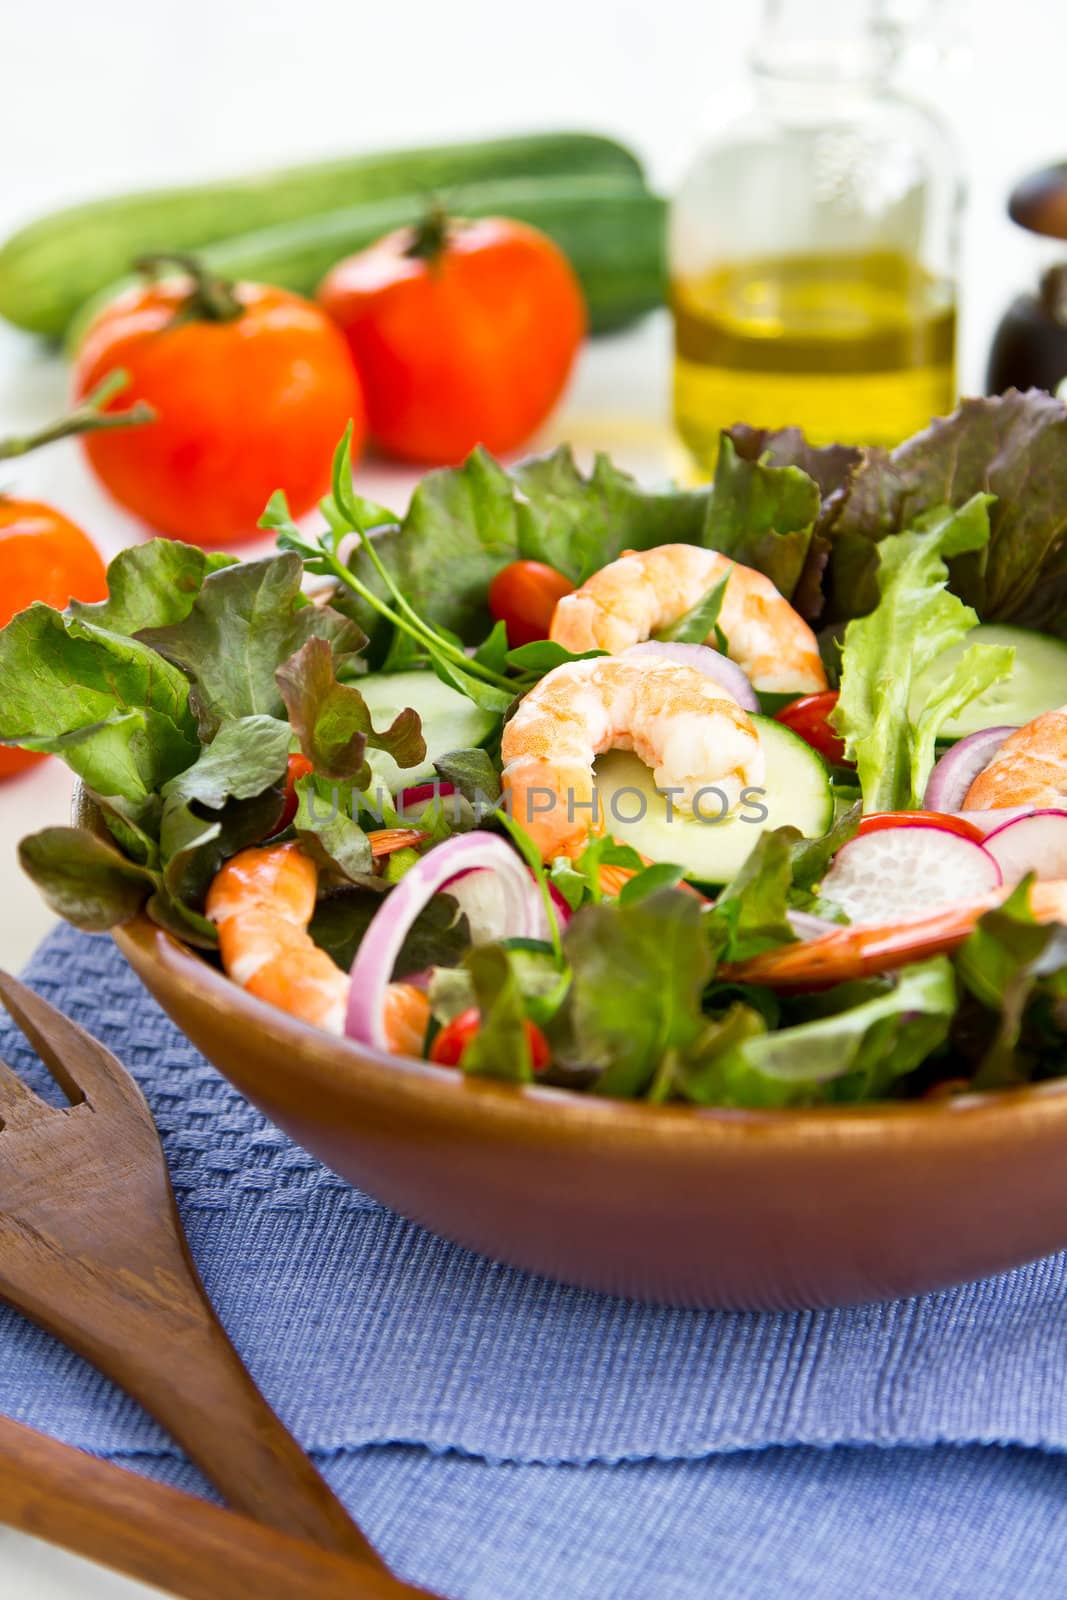 Prawn with lettuce ,tomato and radish salad in wood bowl